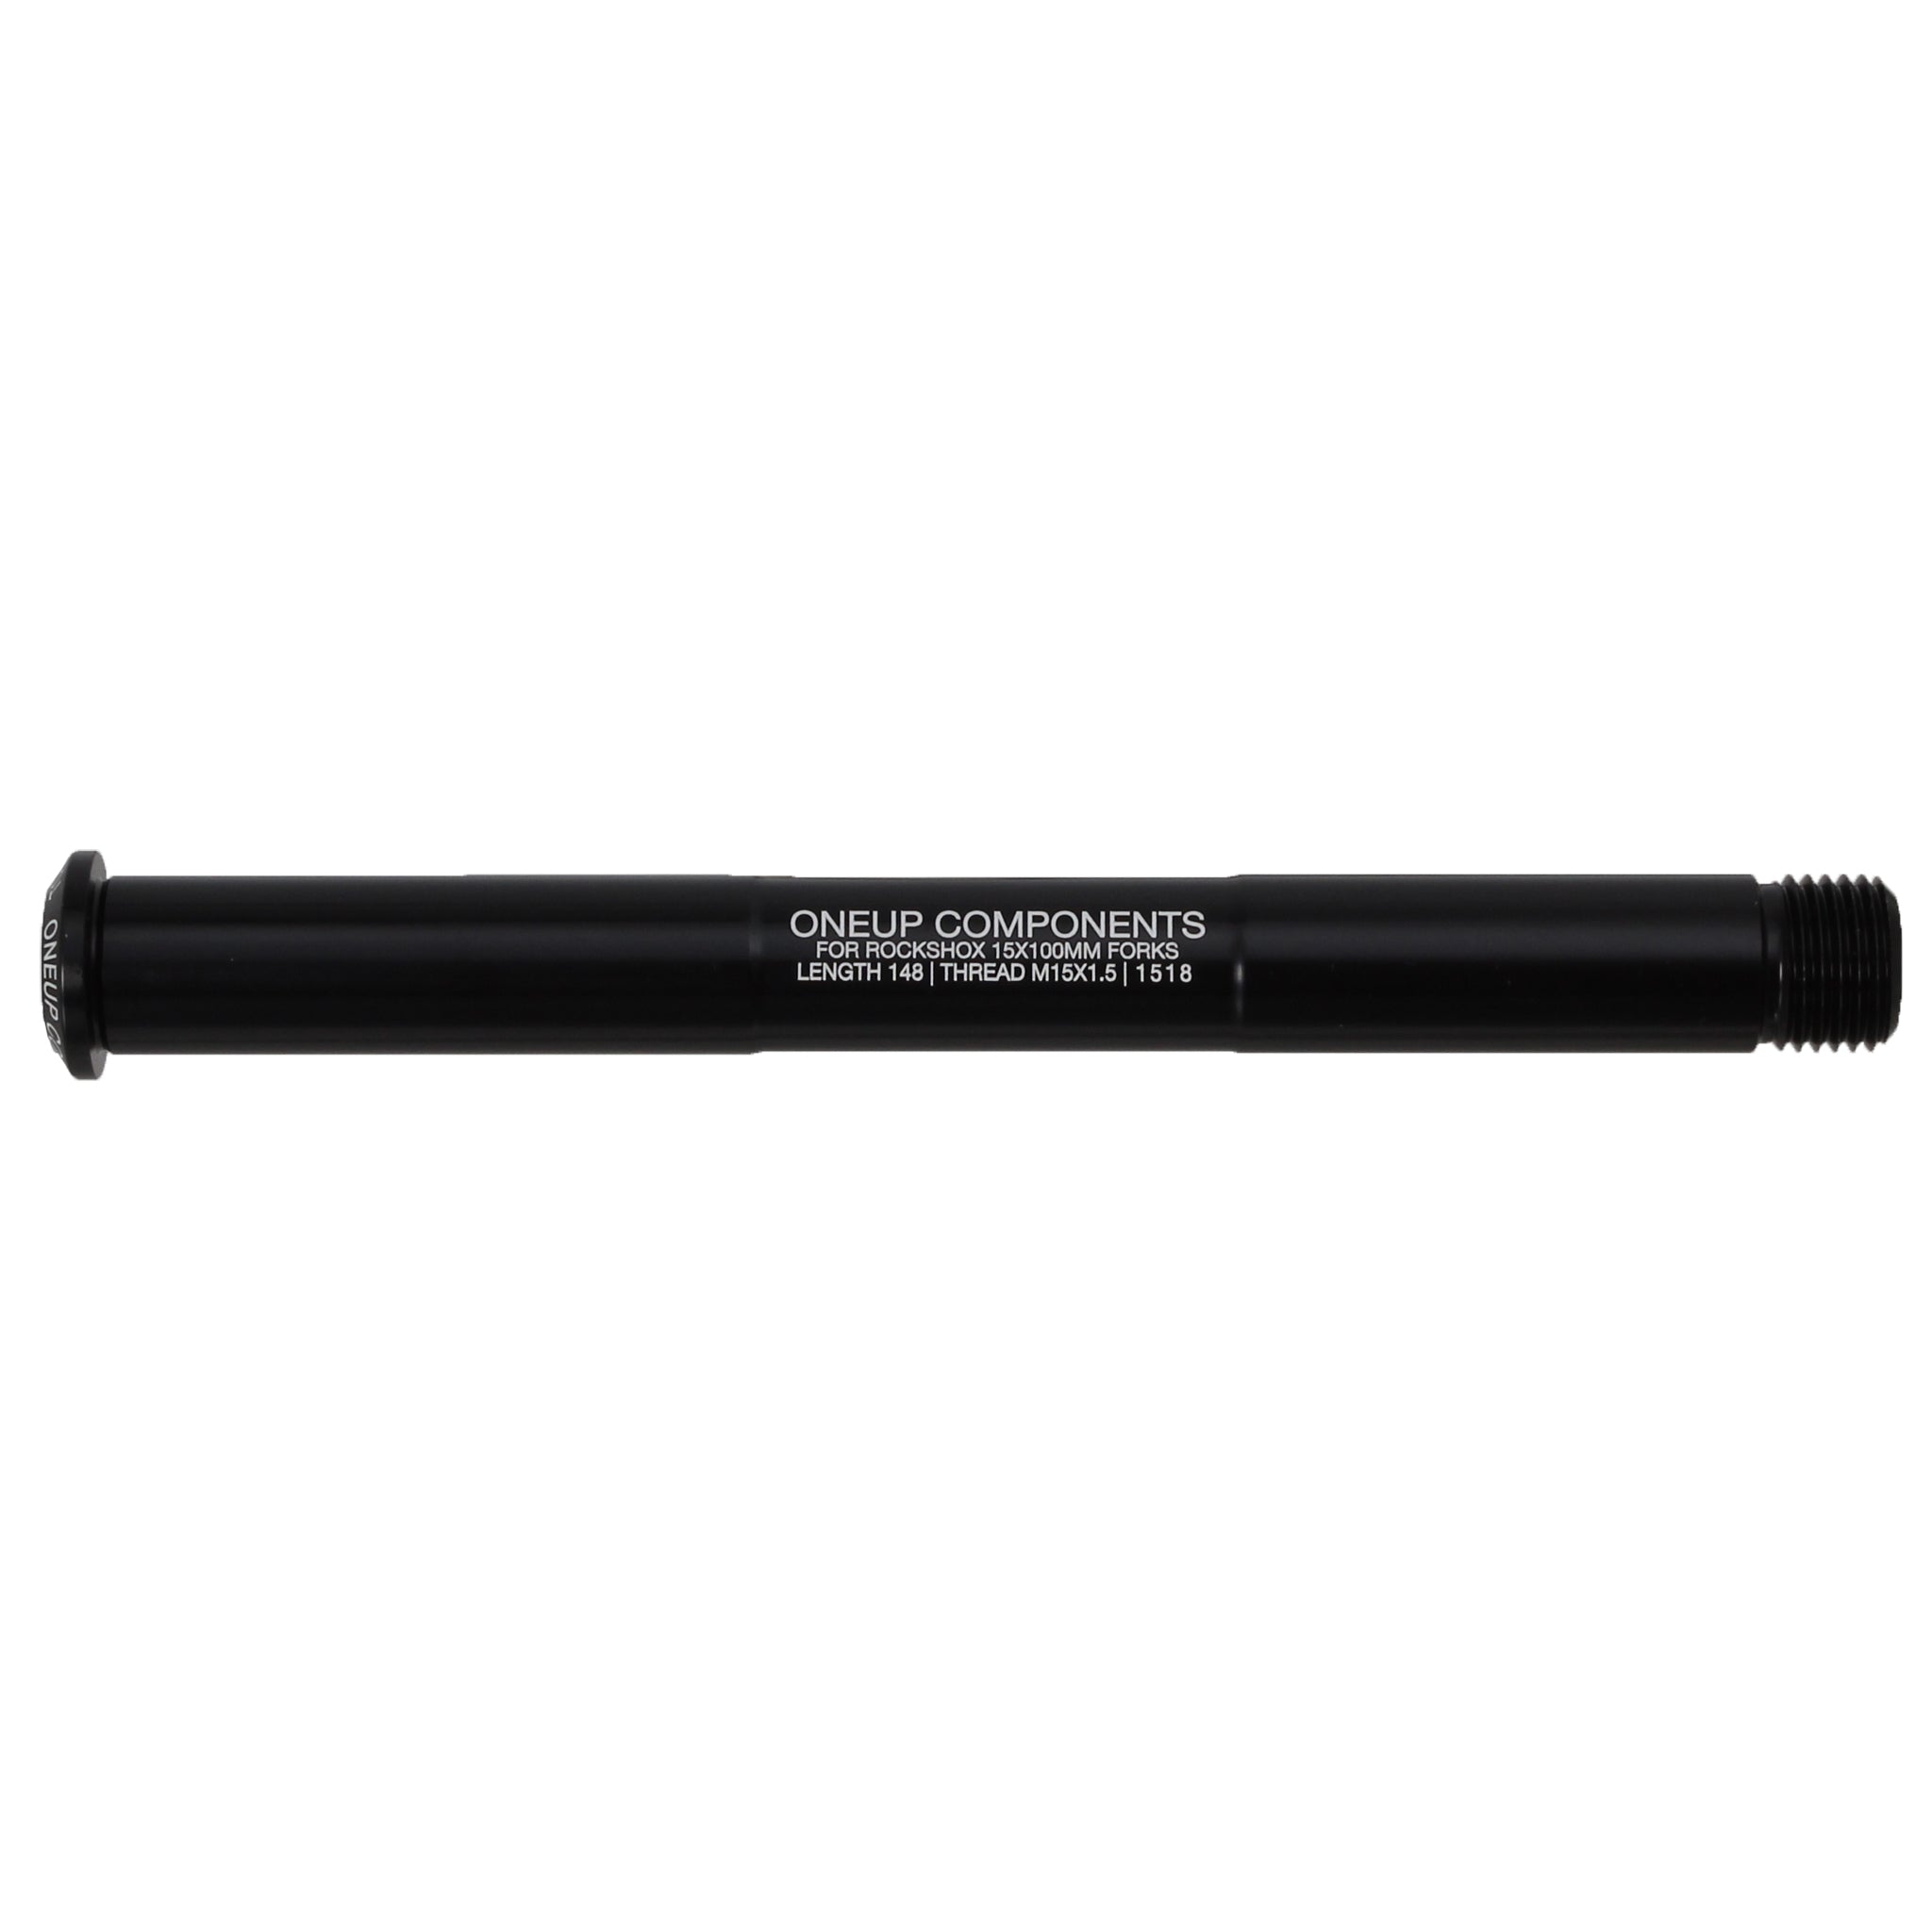 OneUp Components Axle F for RockShox Forks 15x100mm Black